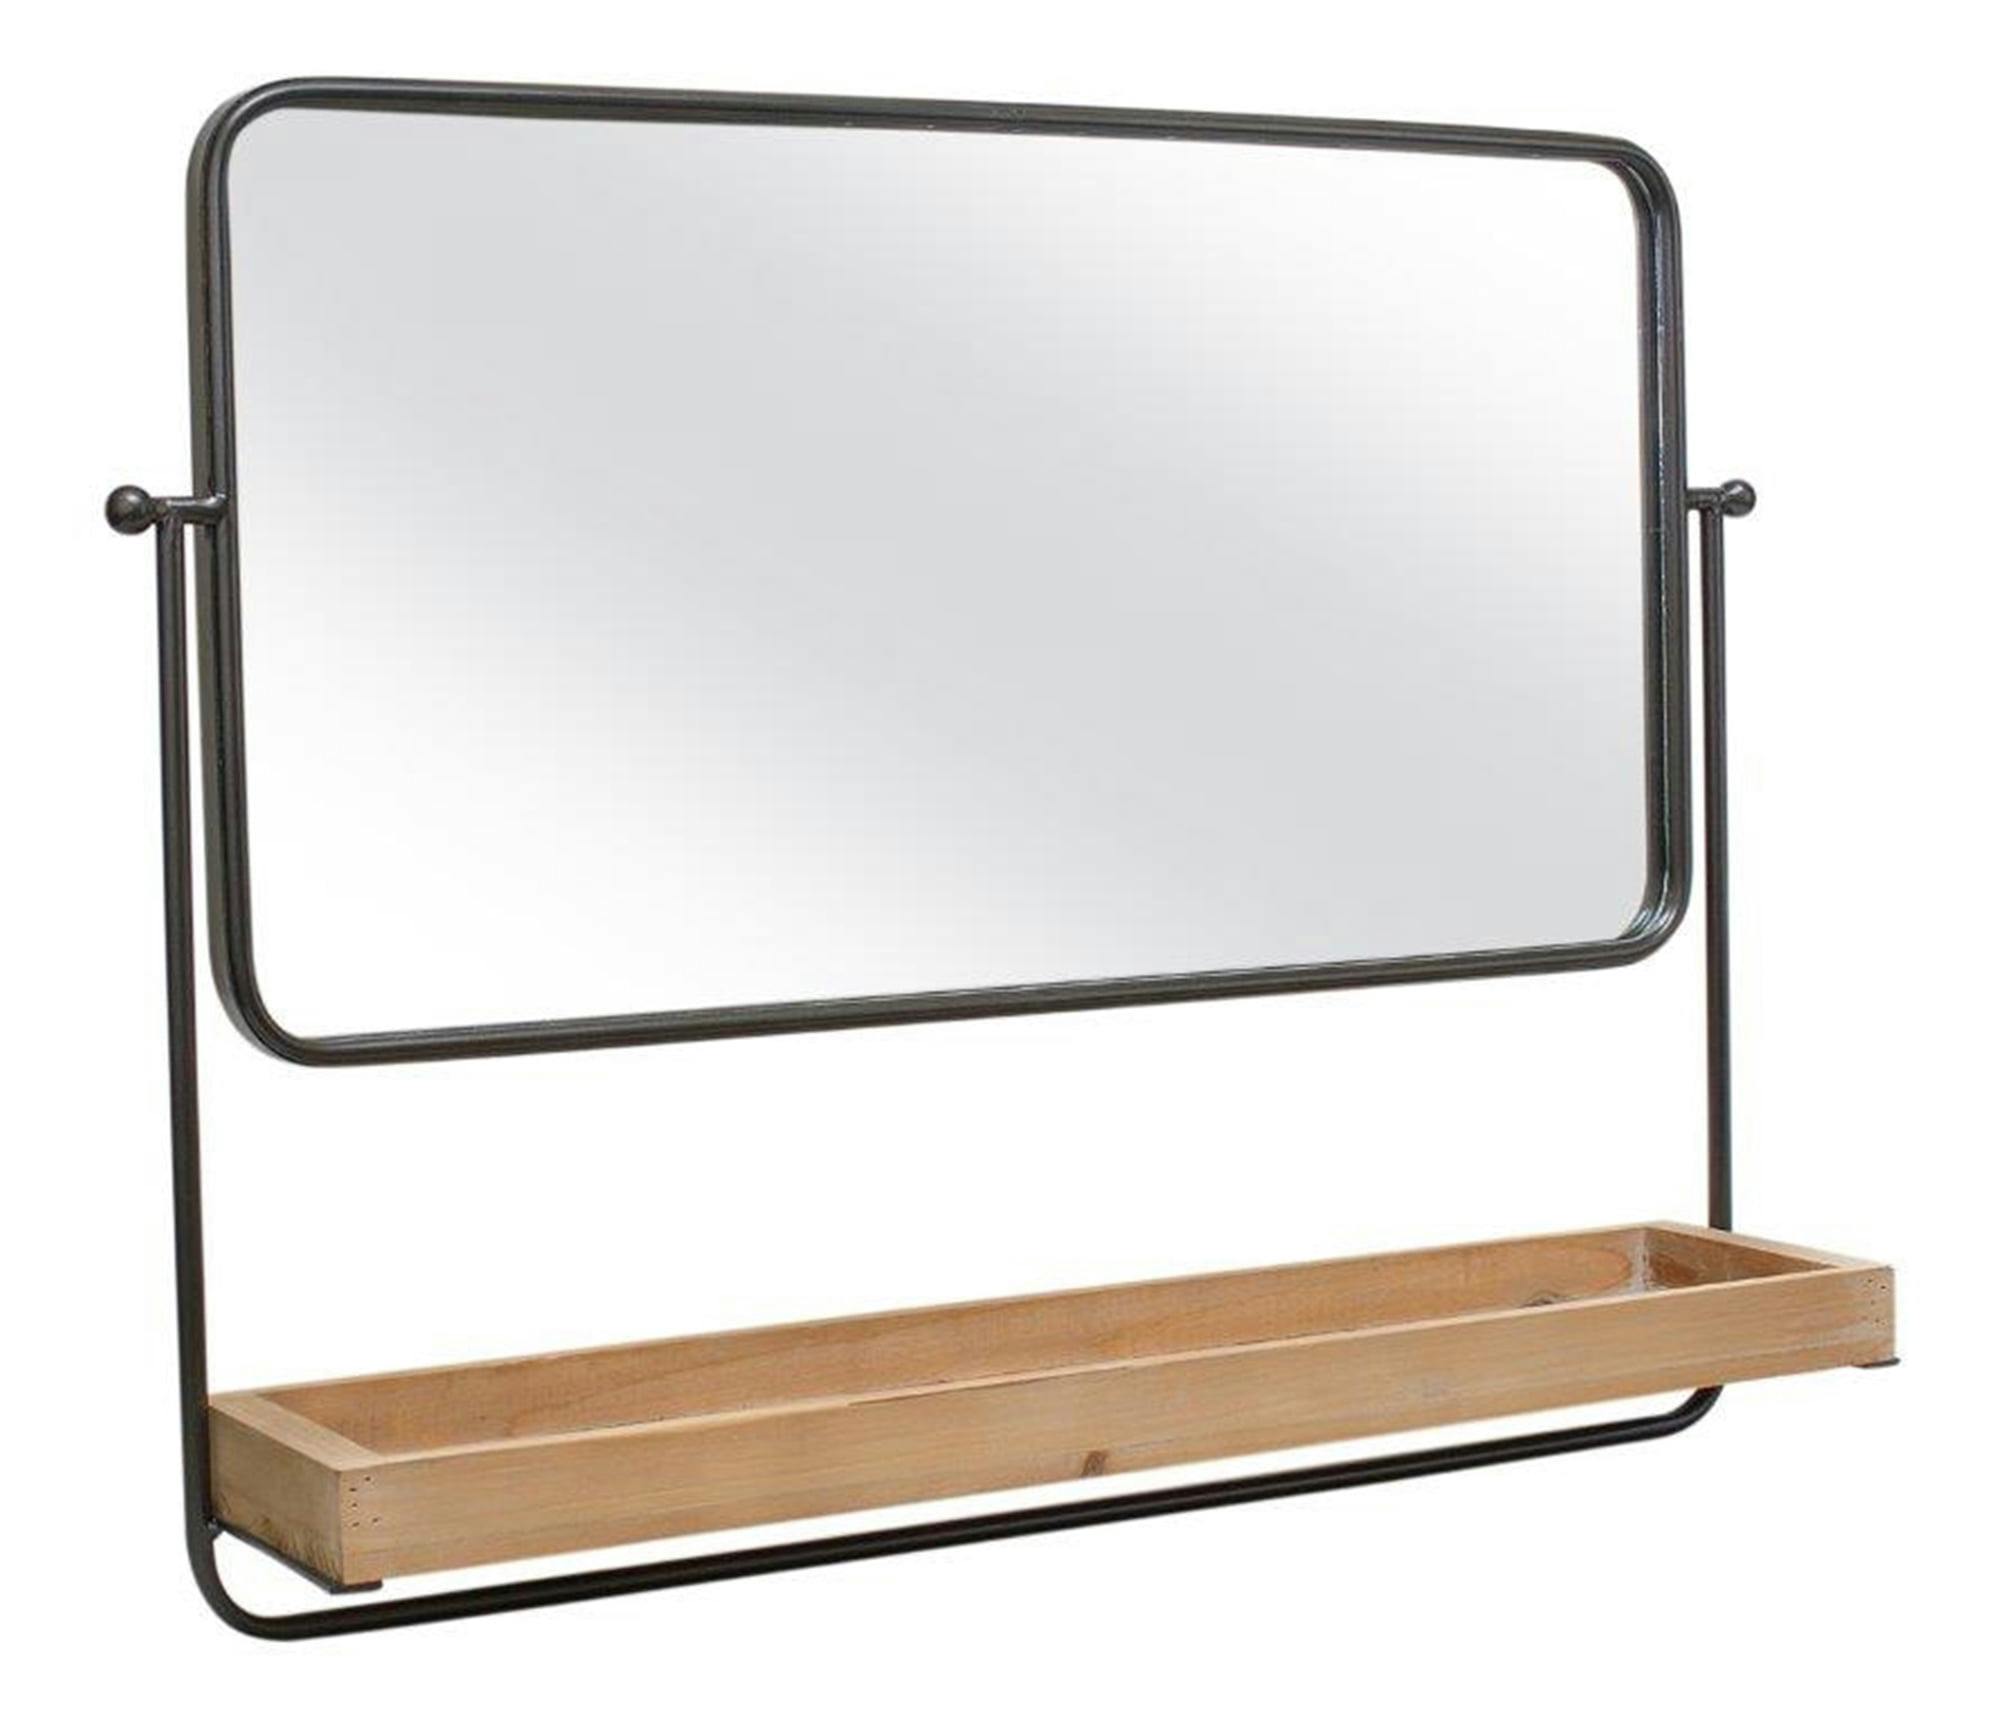 Contemporary Black Metal & Wood Wall Mirror with Shelf, 29"L